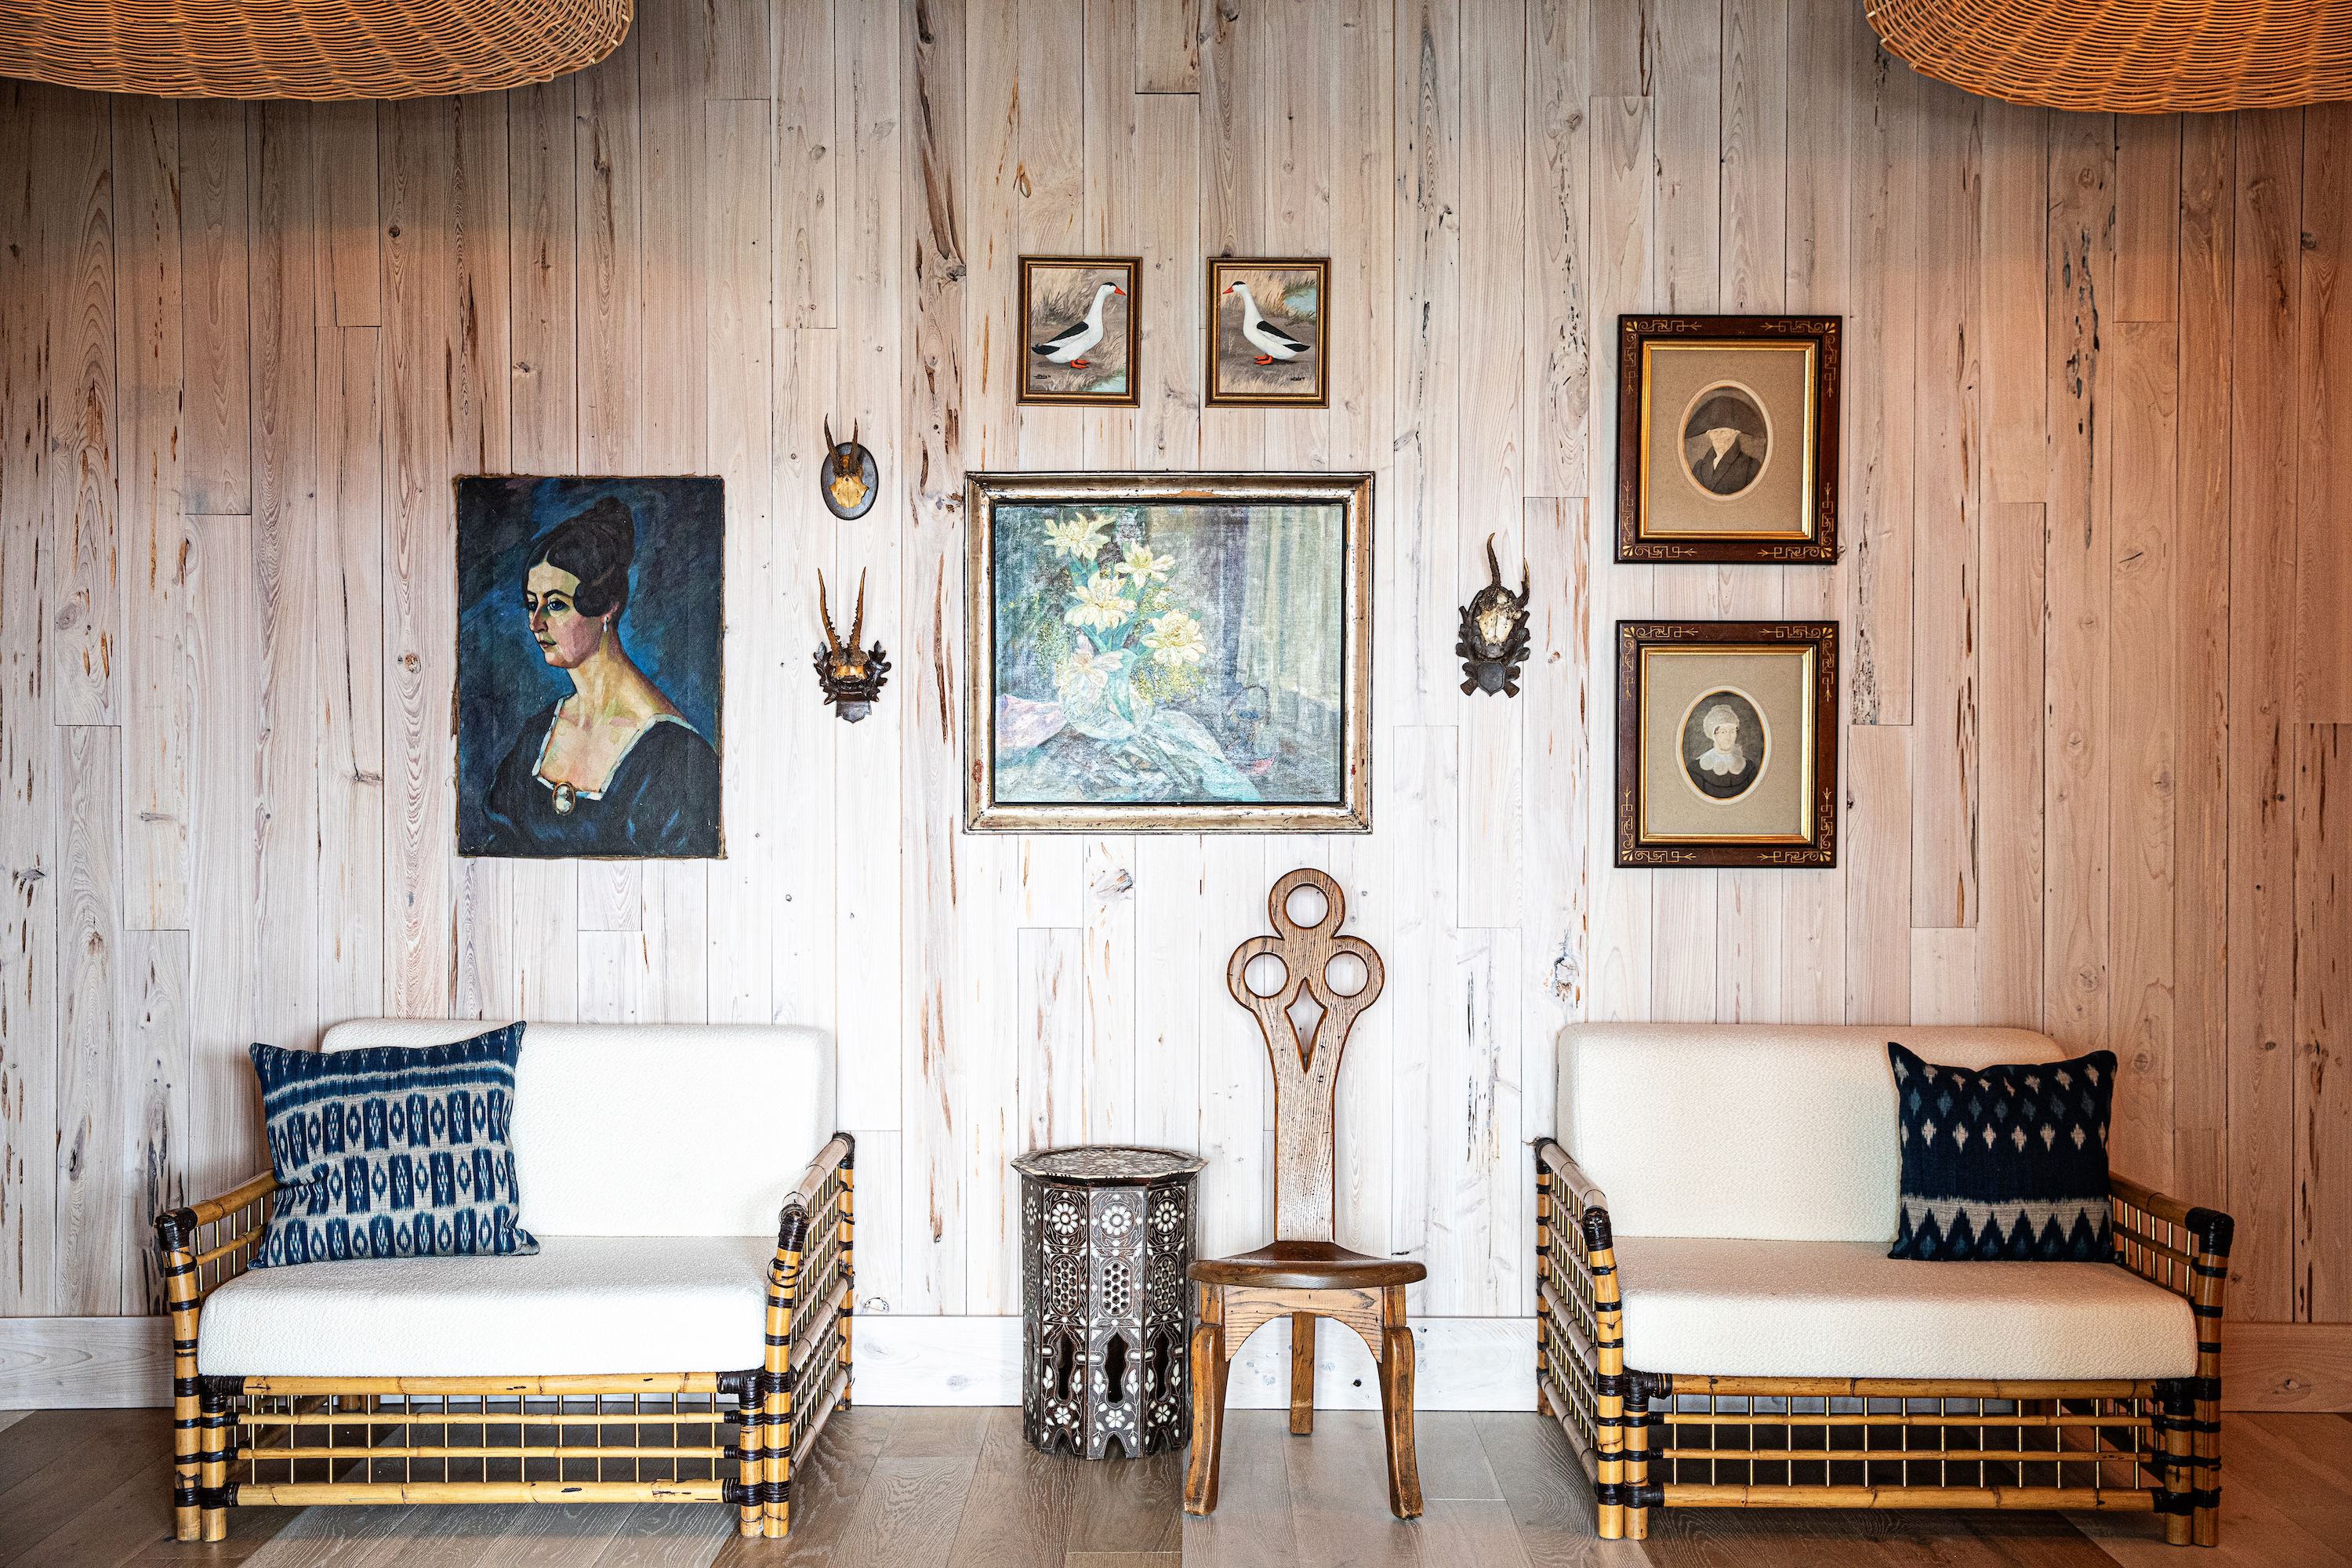 Antique art hangs on a wood wall above two wide chairs.